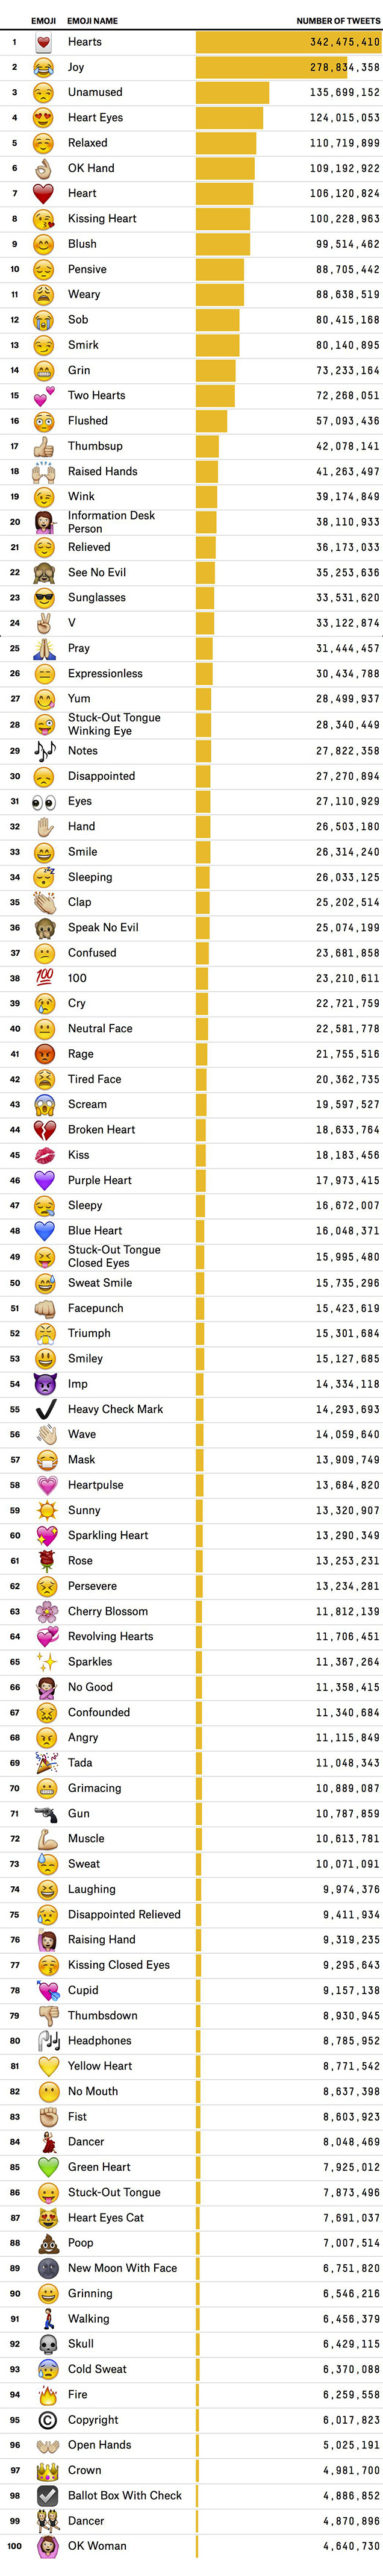 The 100 Most Used Emojis On Twitter